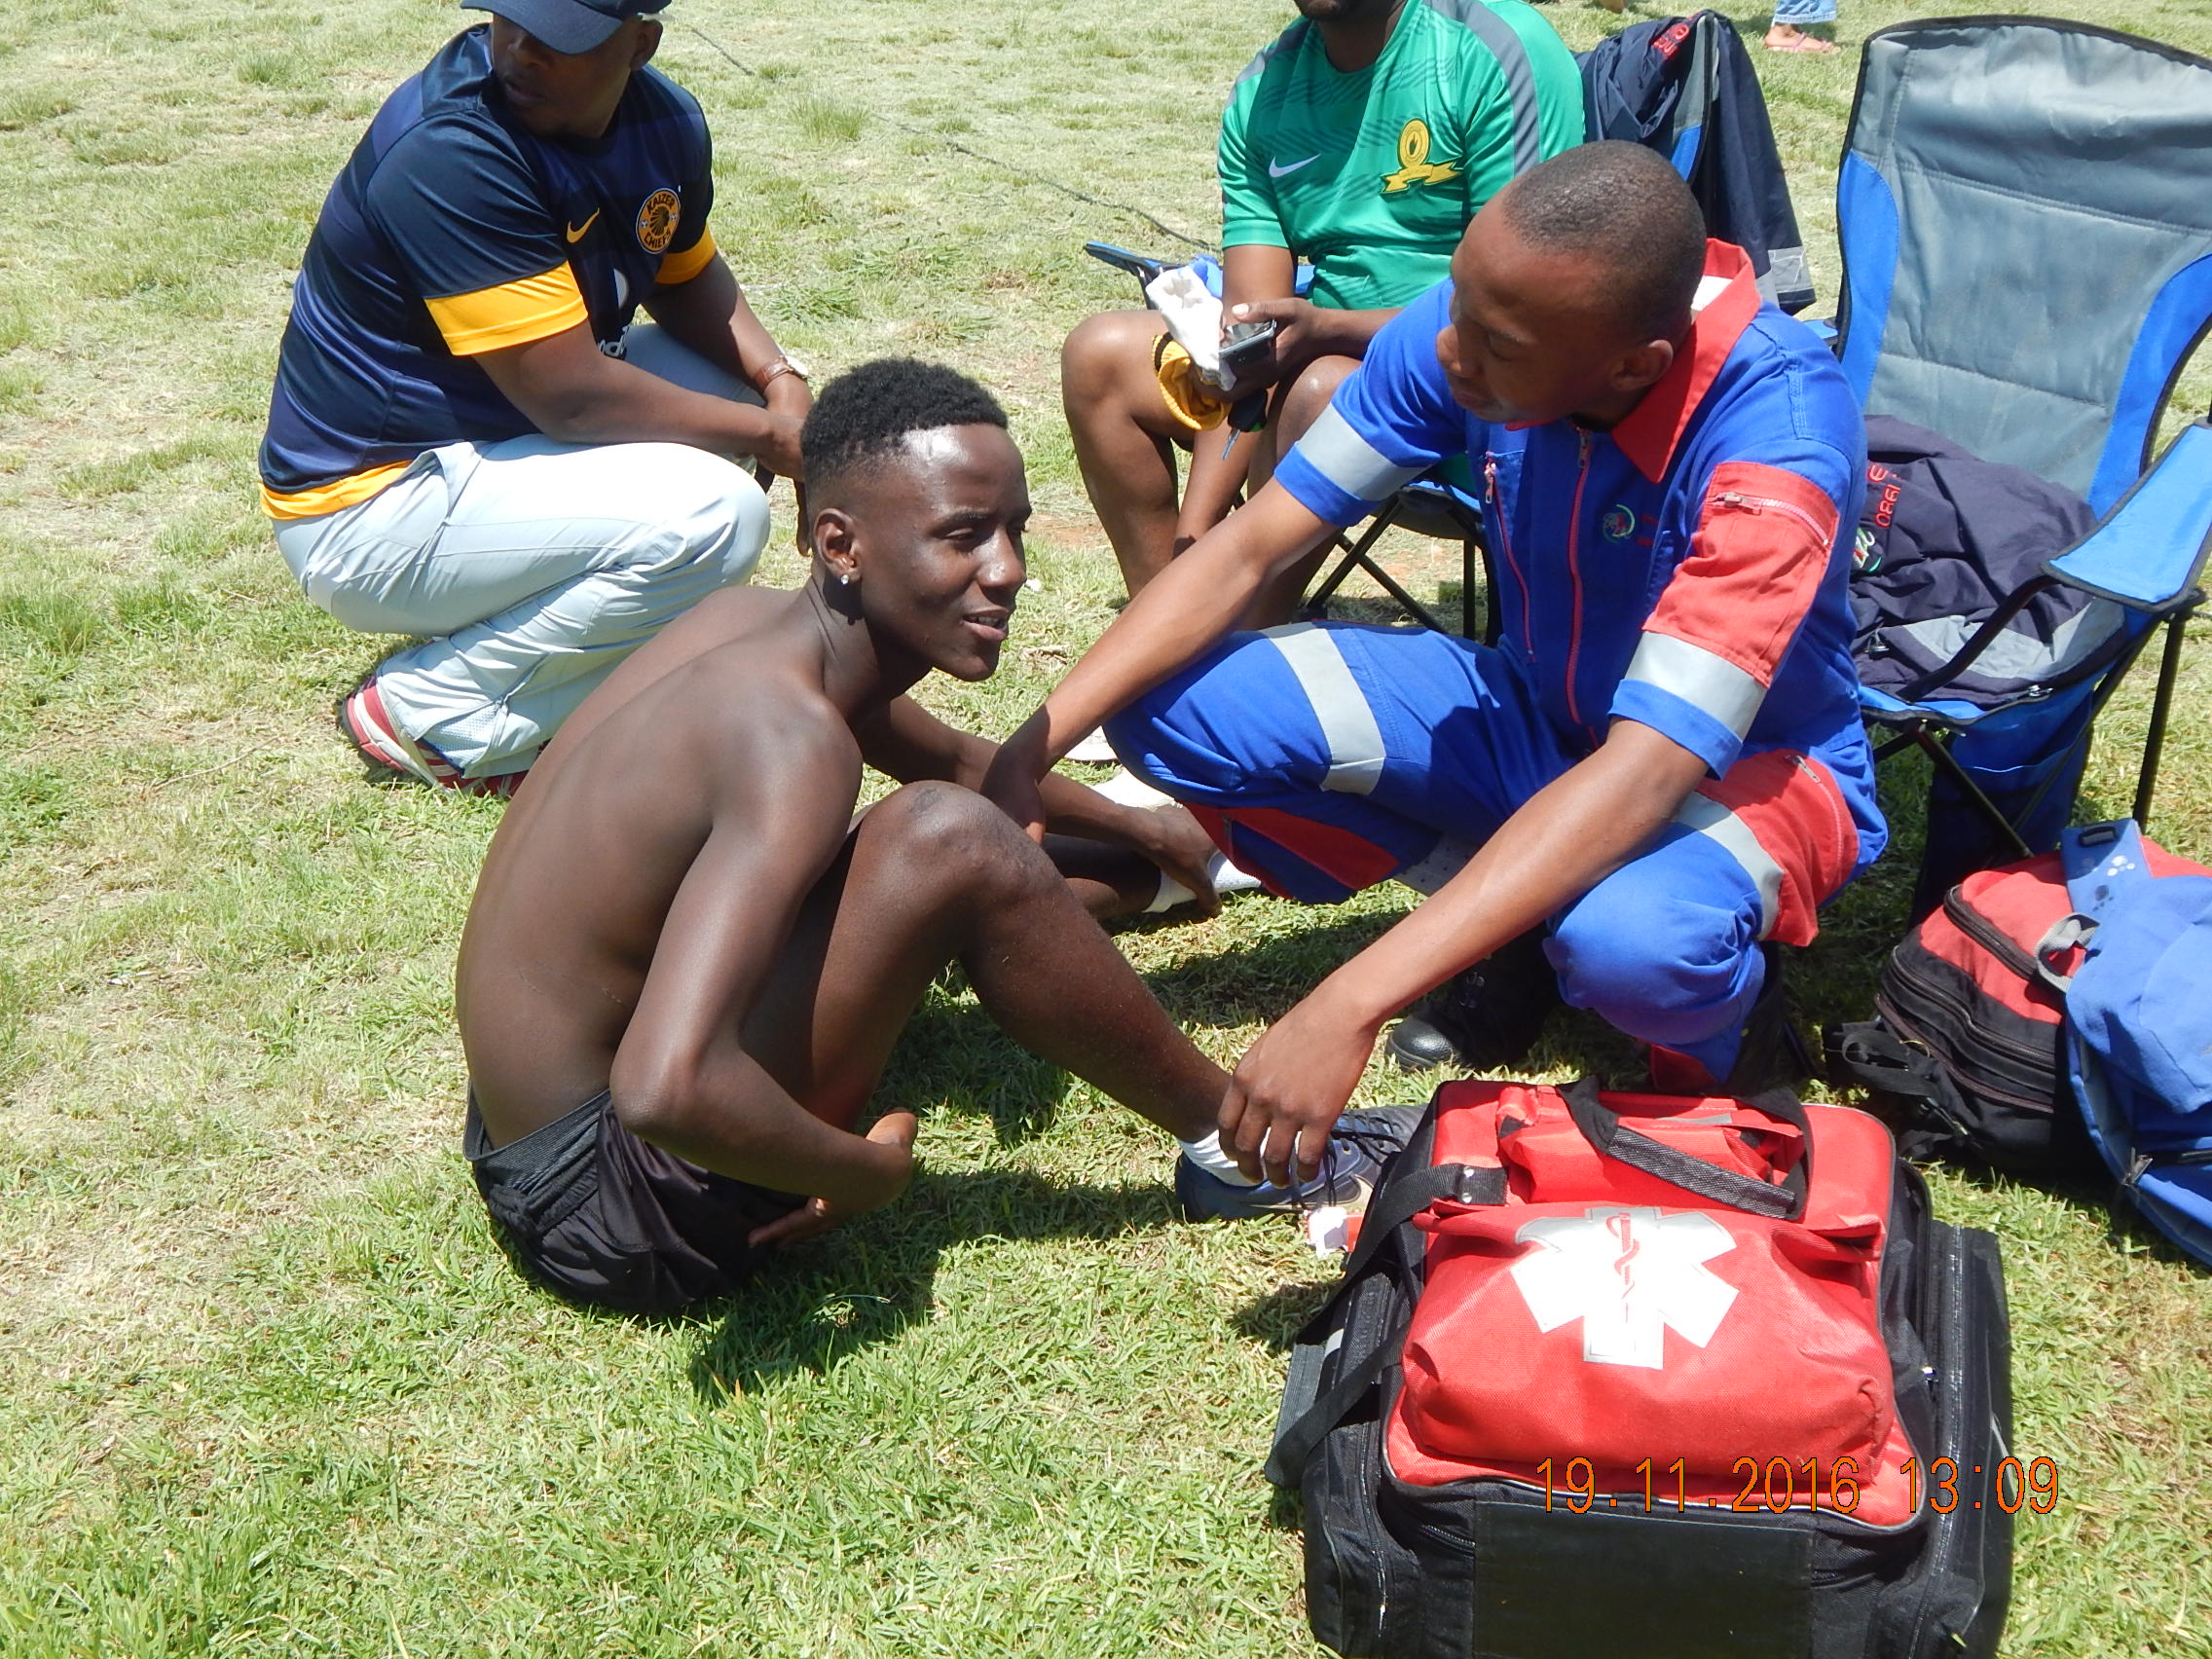 Soccer player receiving minor medical attention